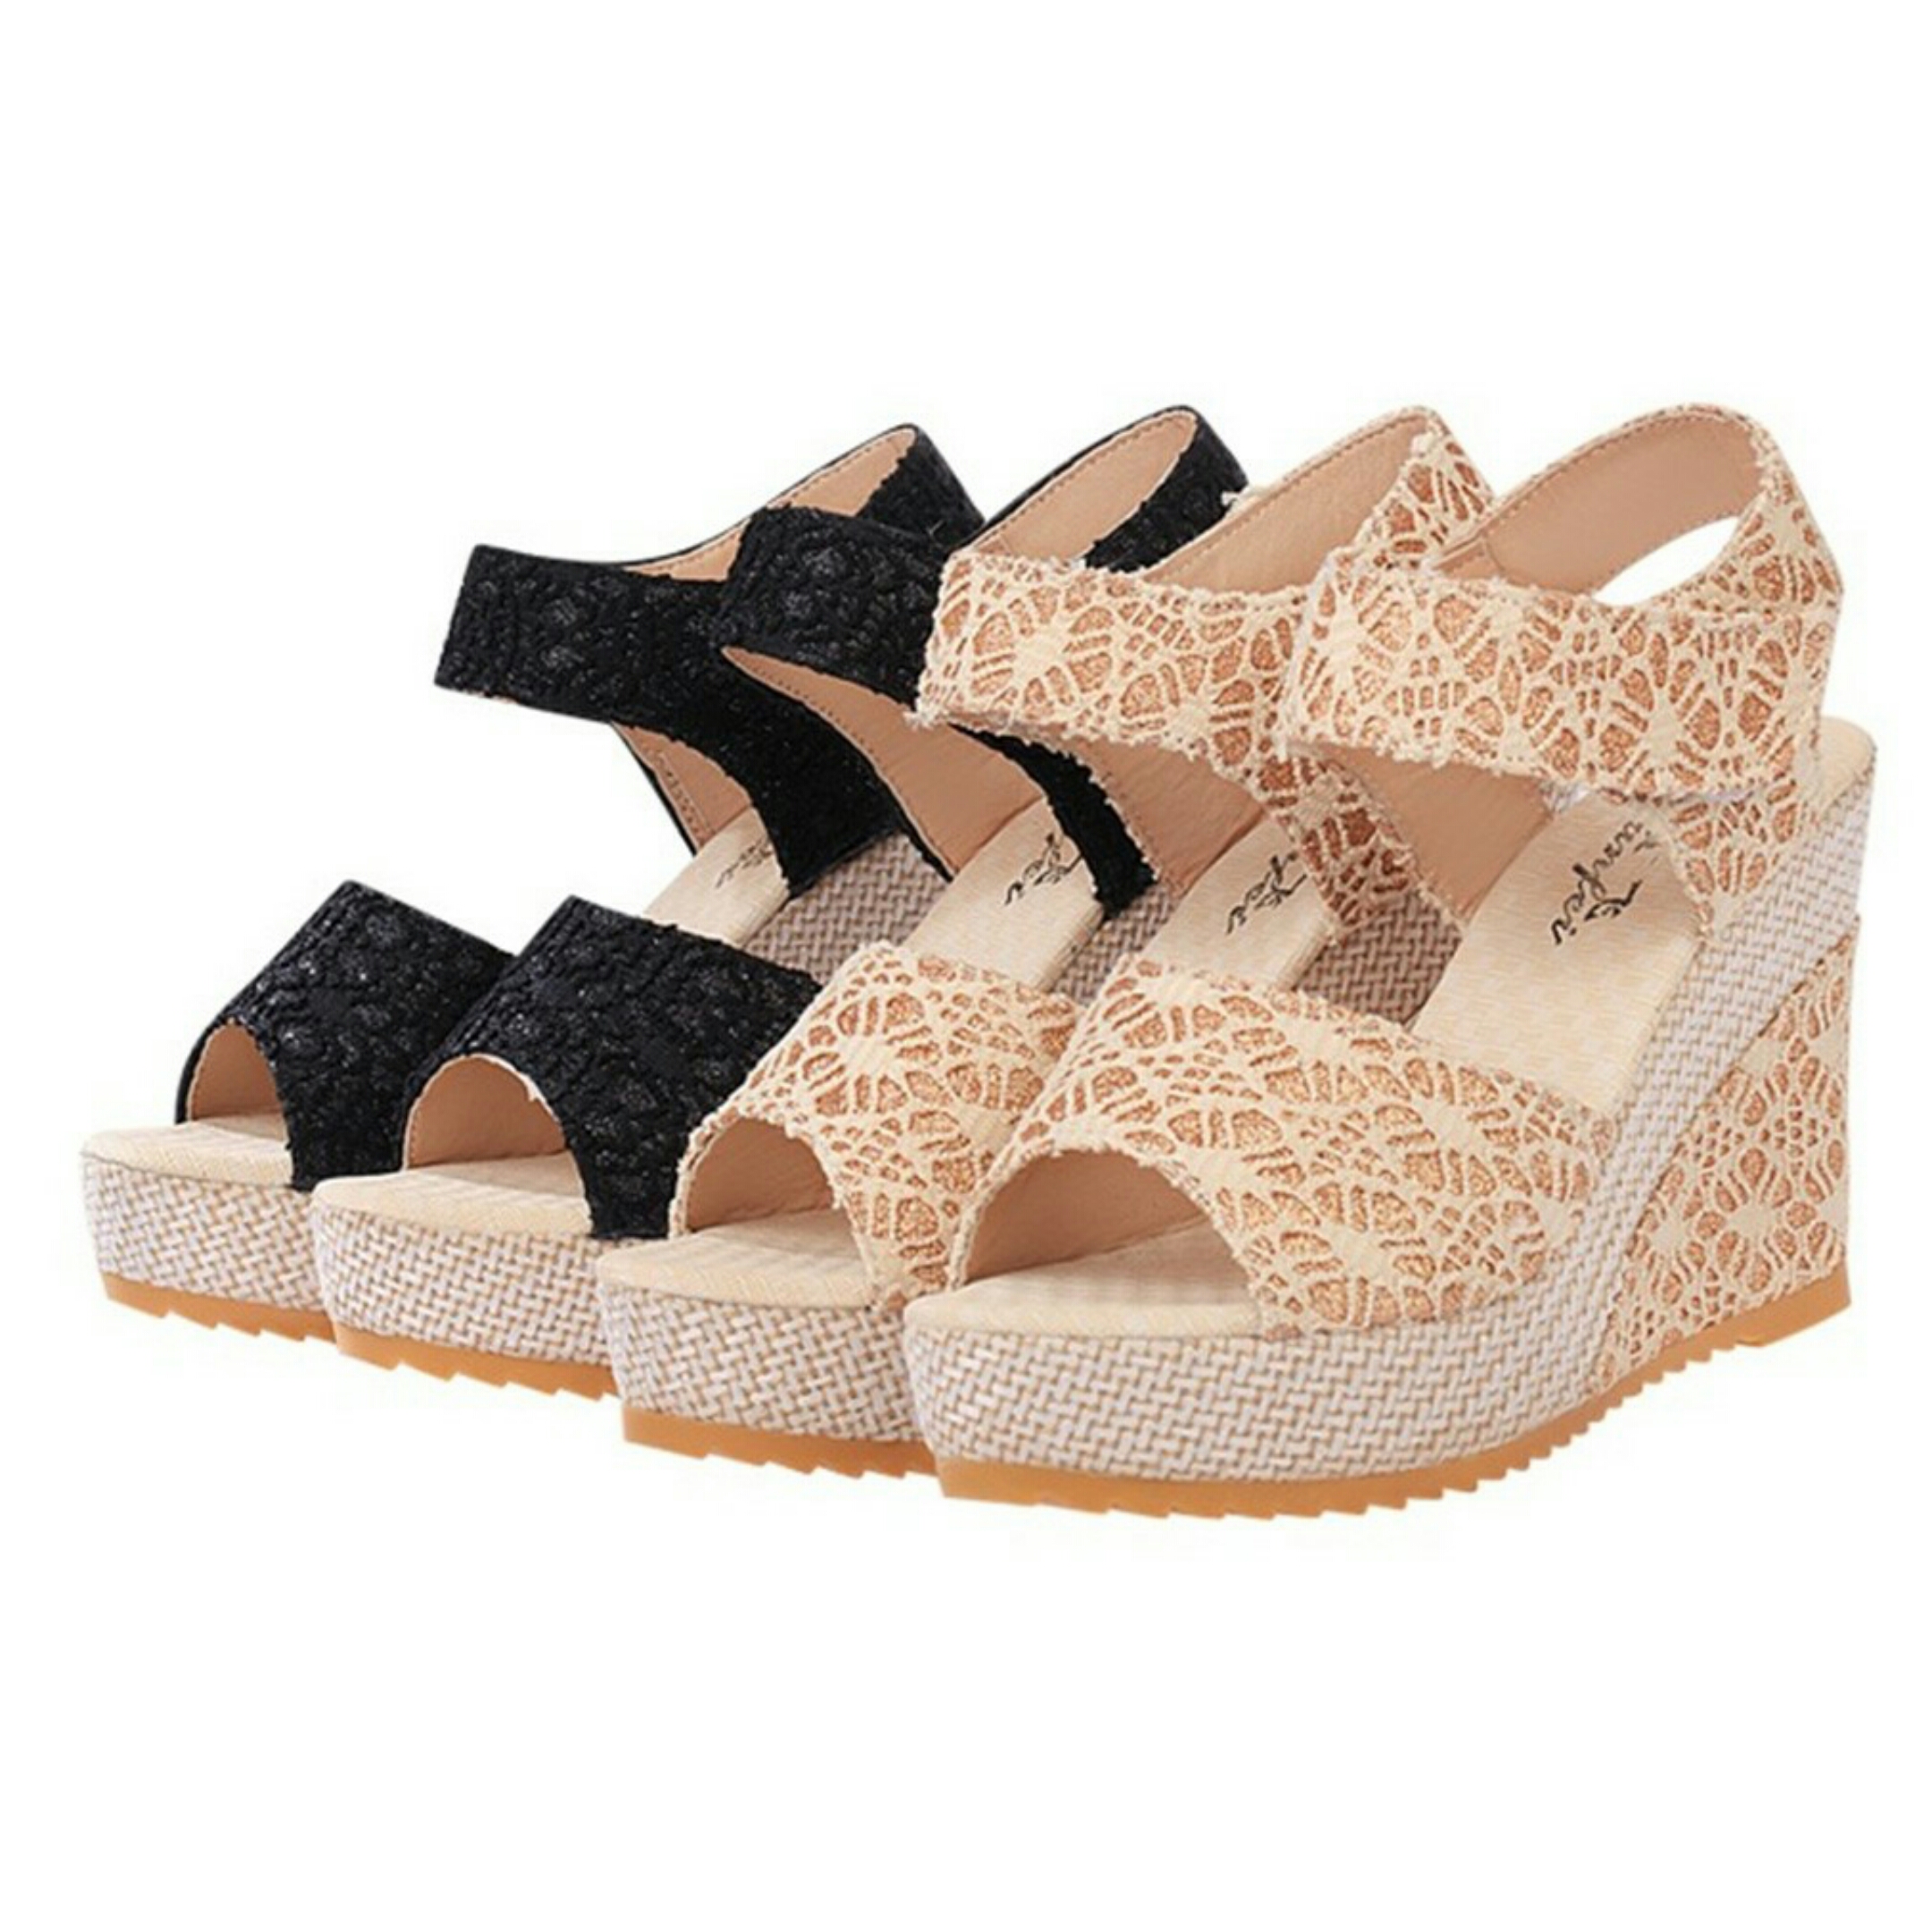 New 2017 LACE STRAP WEDGES Lady shoes Sandal wedge | 11street ...